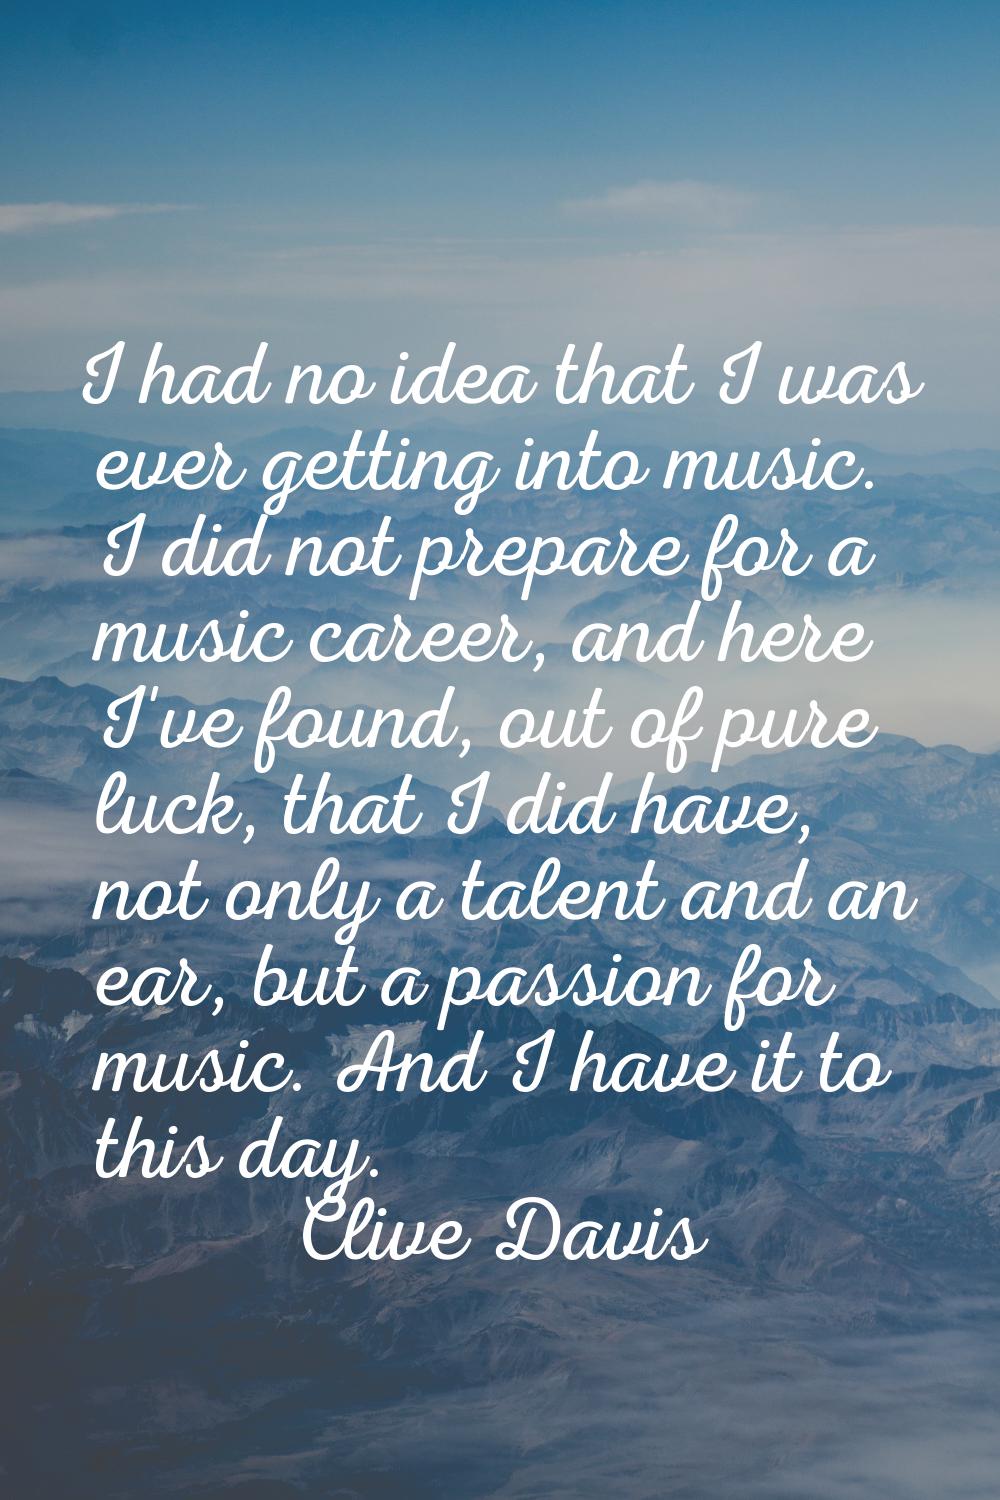 I had no idea that I was ever getting into music. I did not prepare for a music career, and here I'